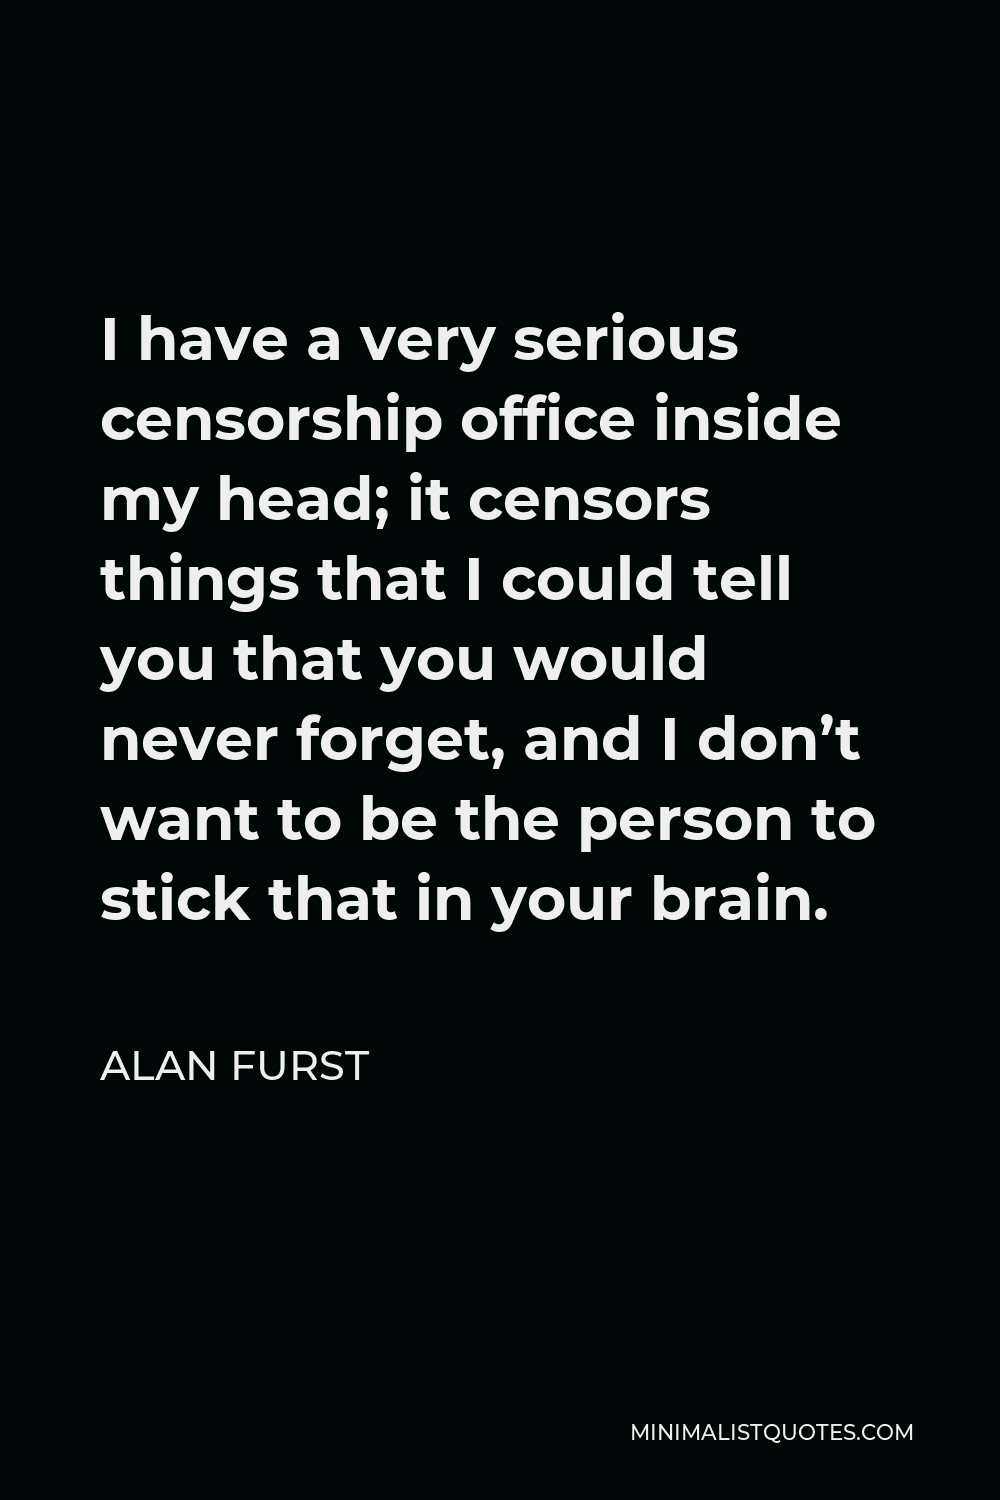 Alan Furst Quote - I have a very serious censorship office inside my head; it censors things that I could tell you that you would never forget, and I don’t want to be the person to stick that in your brain.